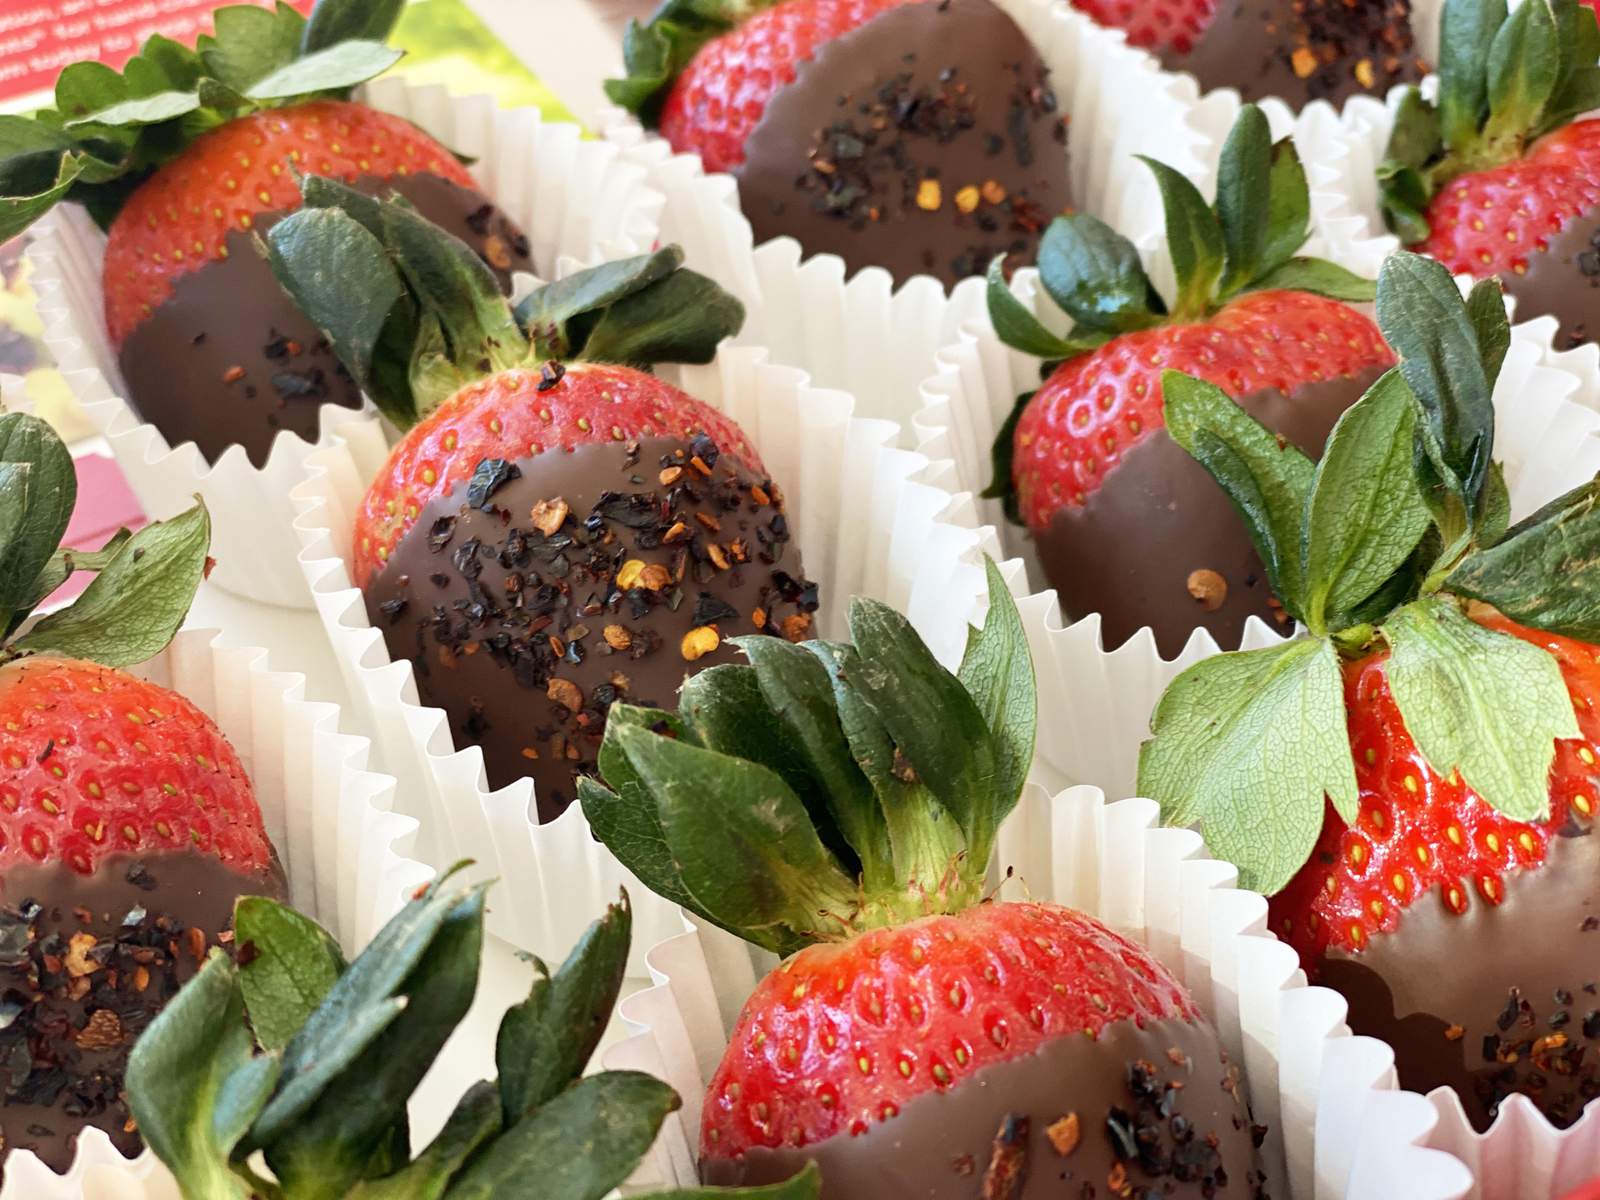 Extreme Foods: Spice up your love life with these spicy chocolate-covered strawberries at Edibles